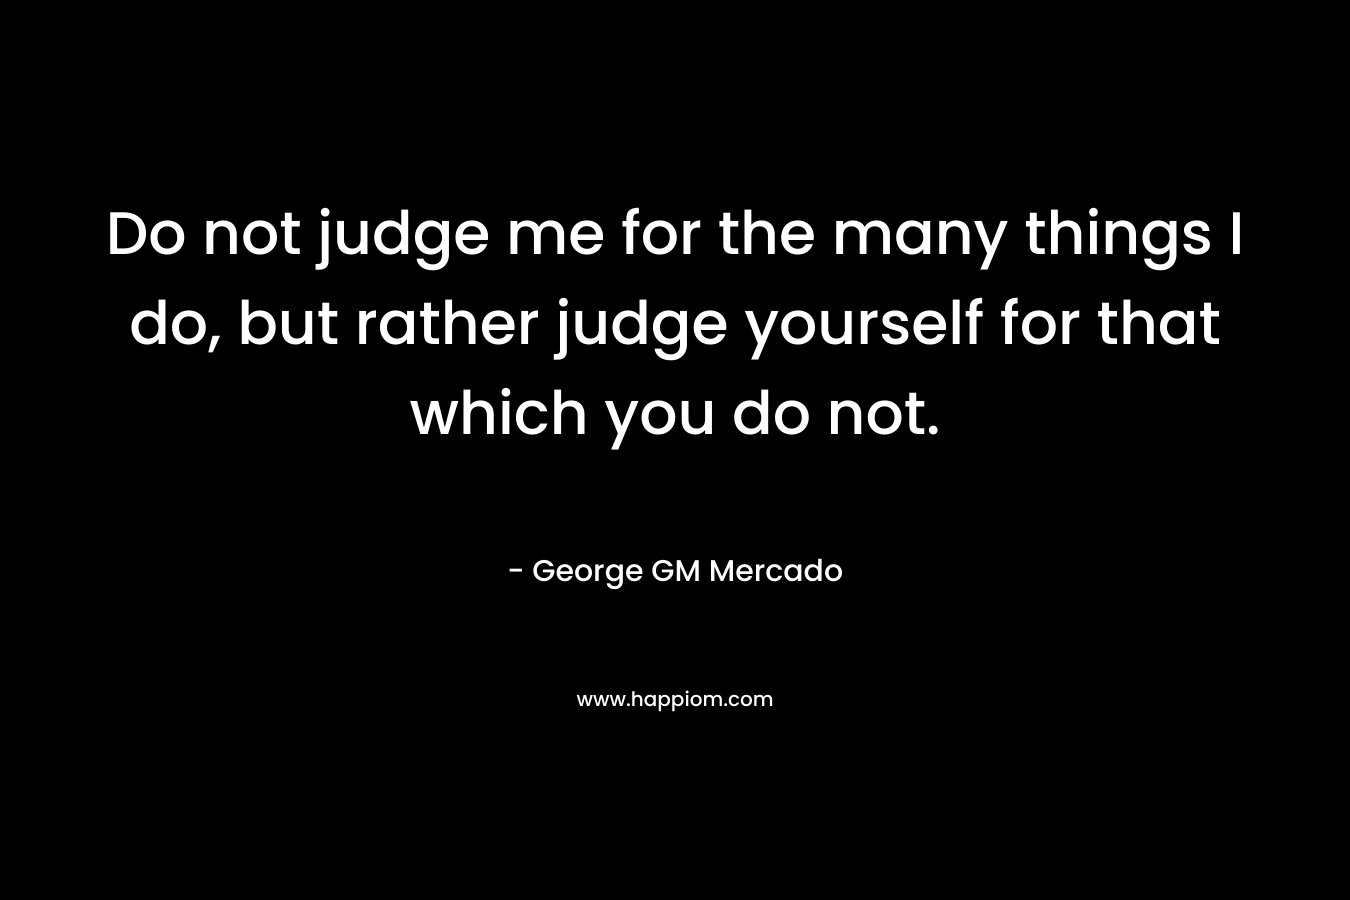 Do not judge me for the many things I do, but rather judge yourself for that which you do not. – George GM Mercado